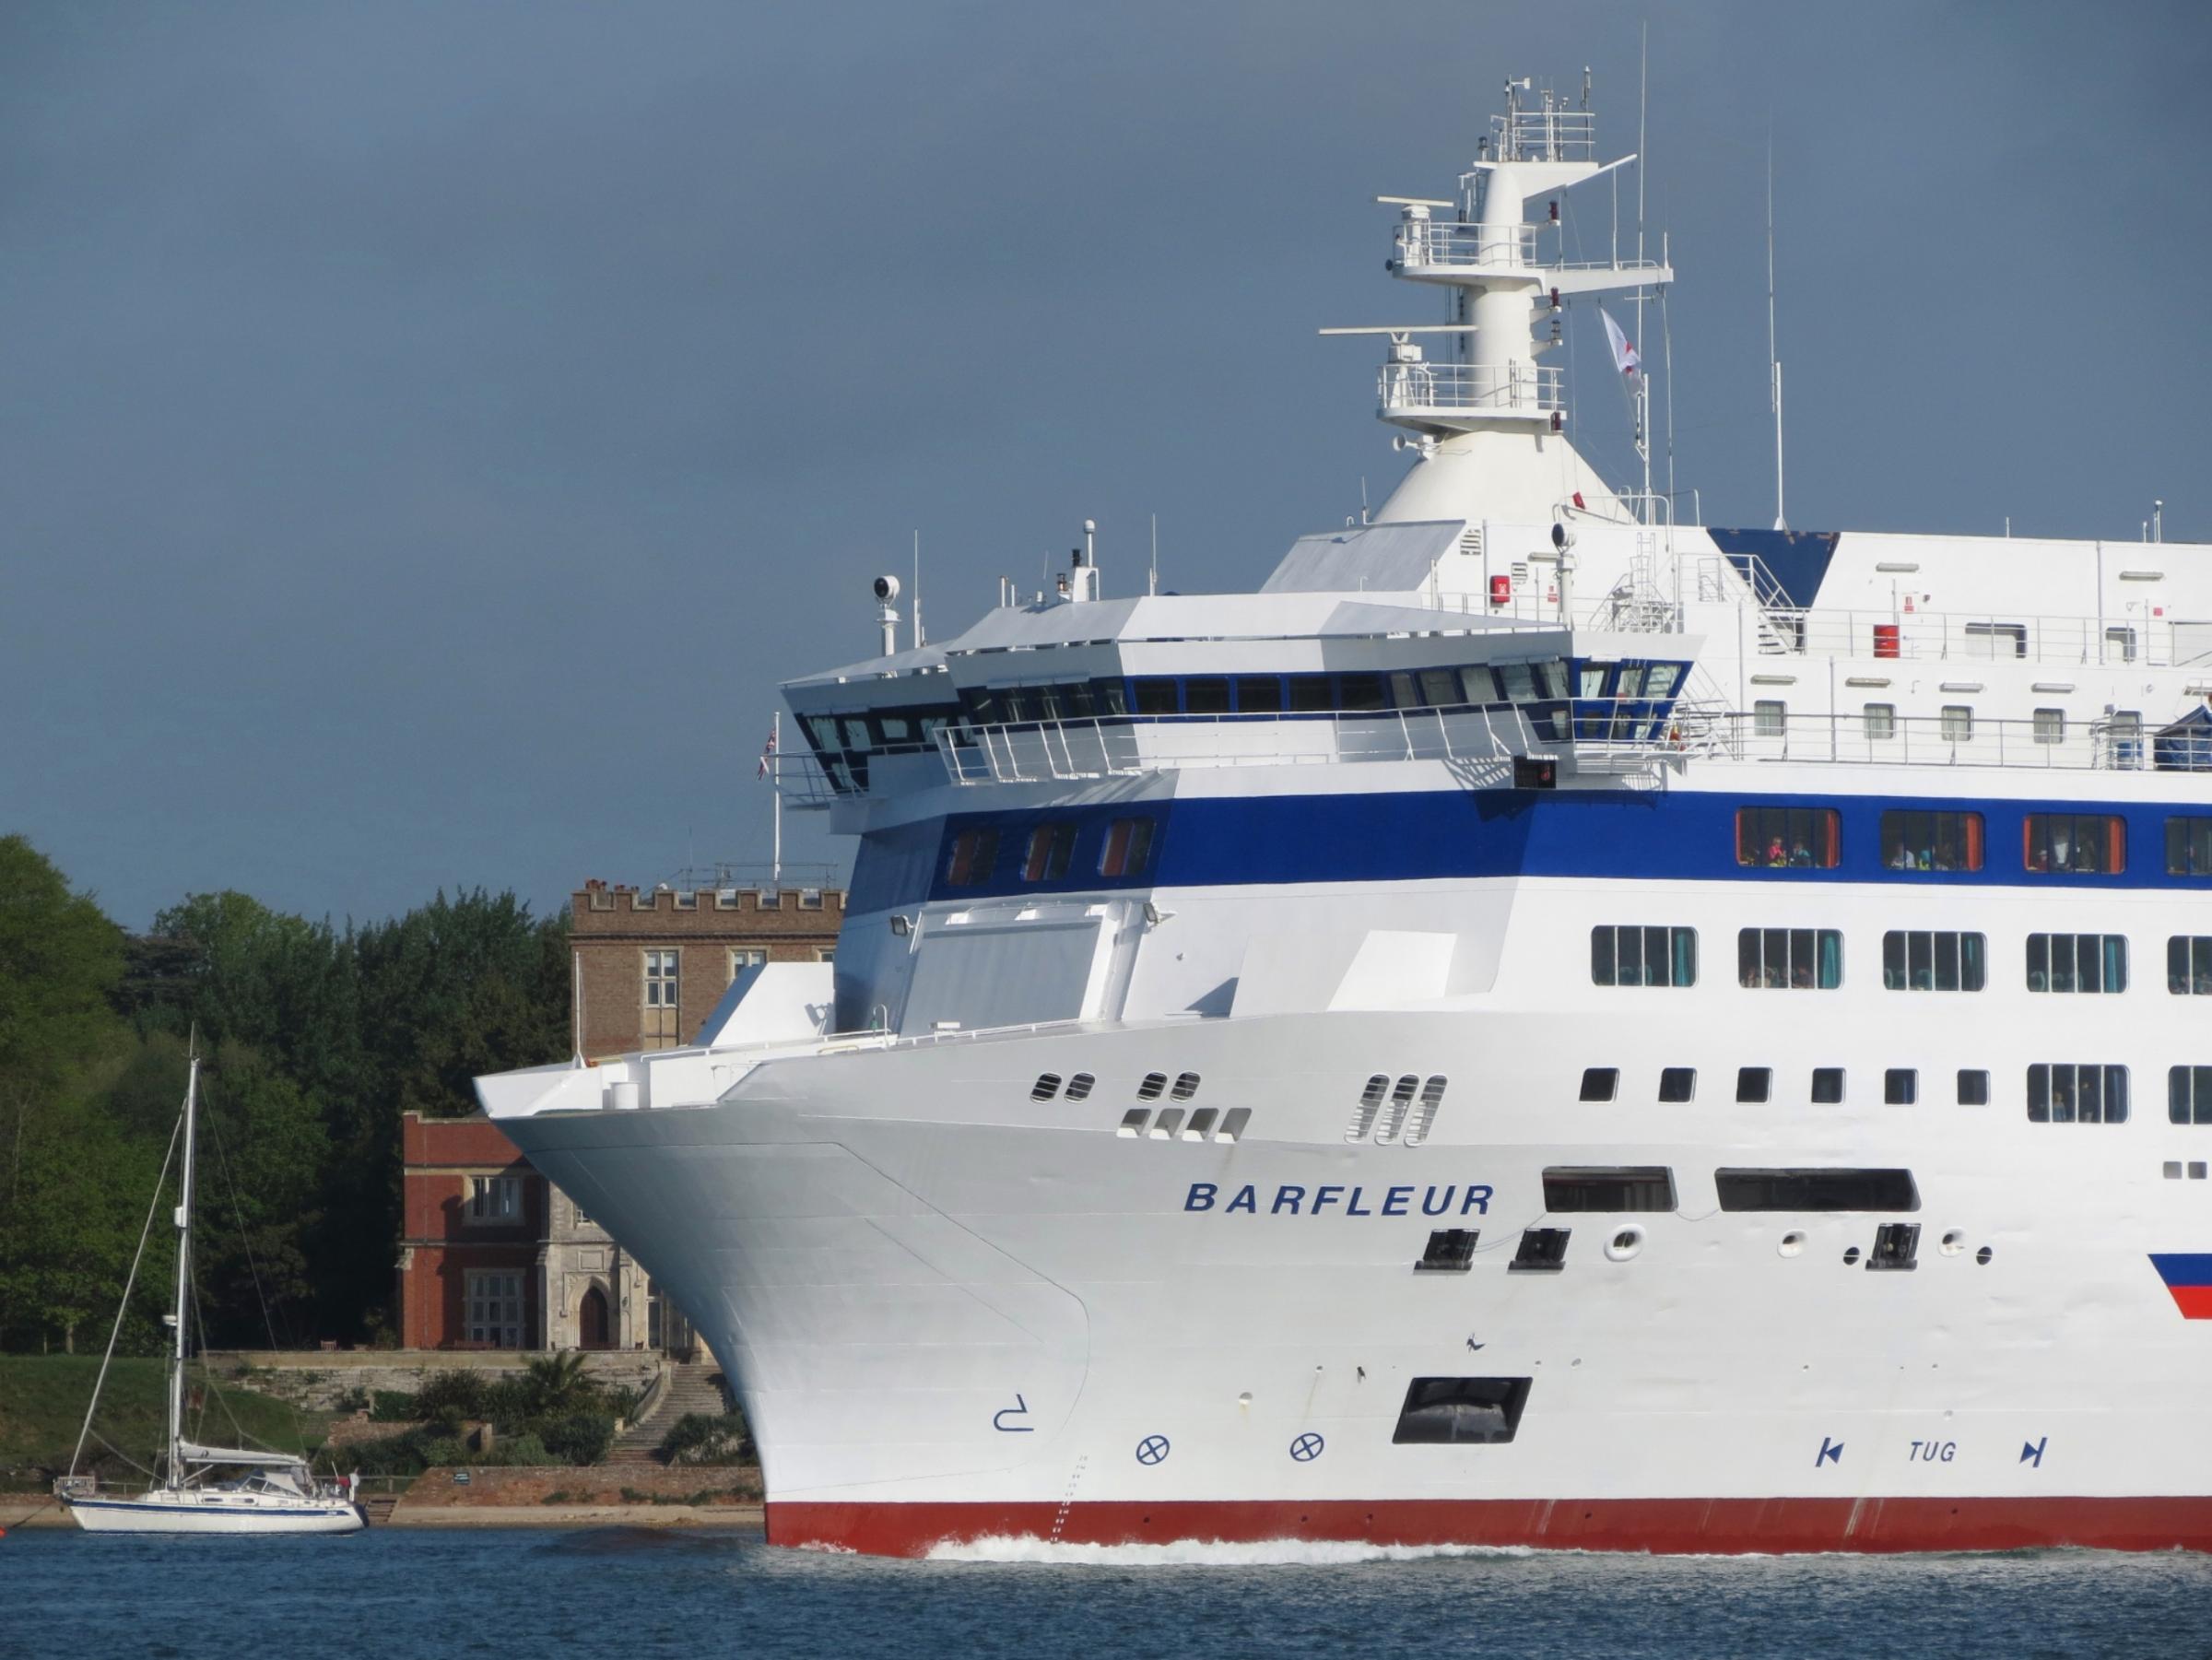 Brittany Ferries Barfleur at Poole